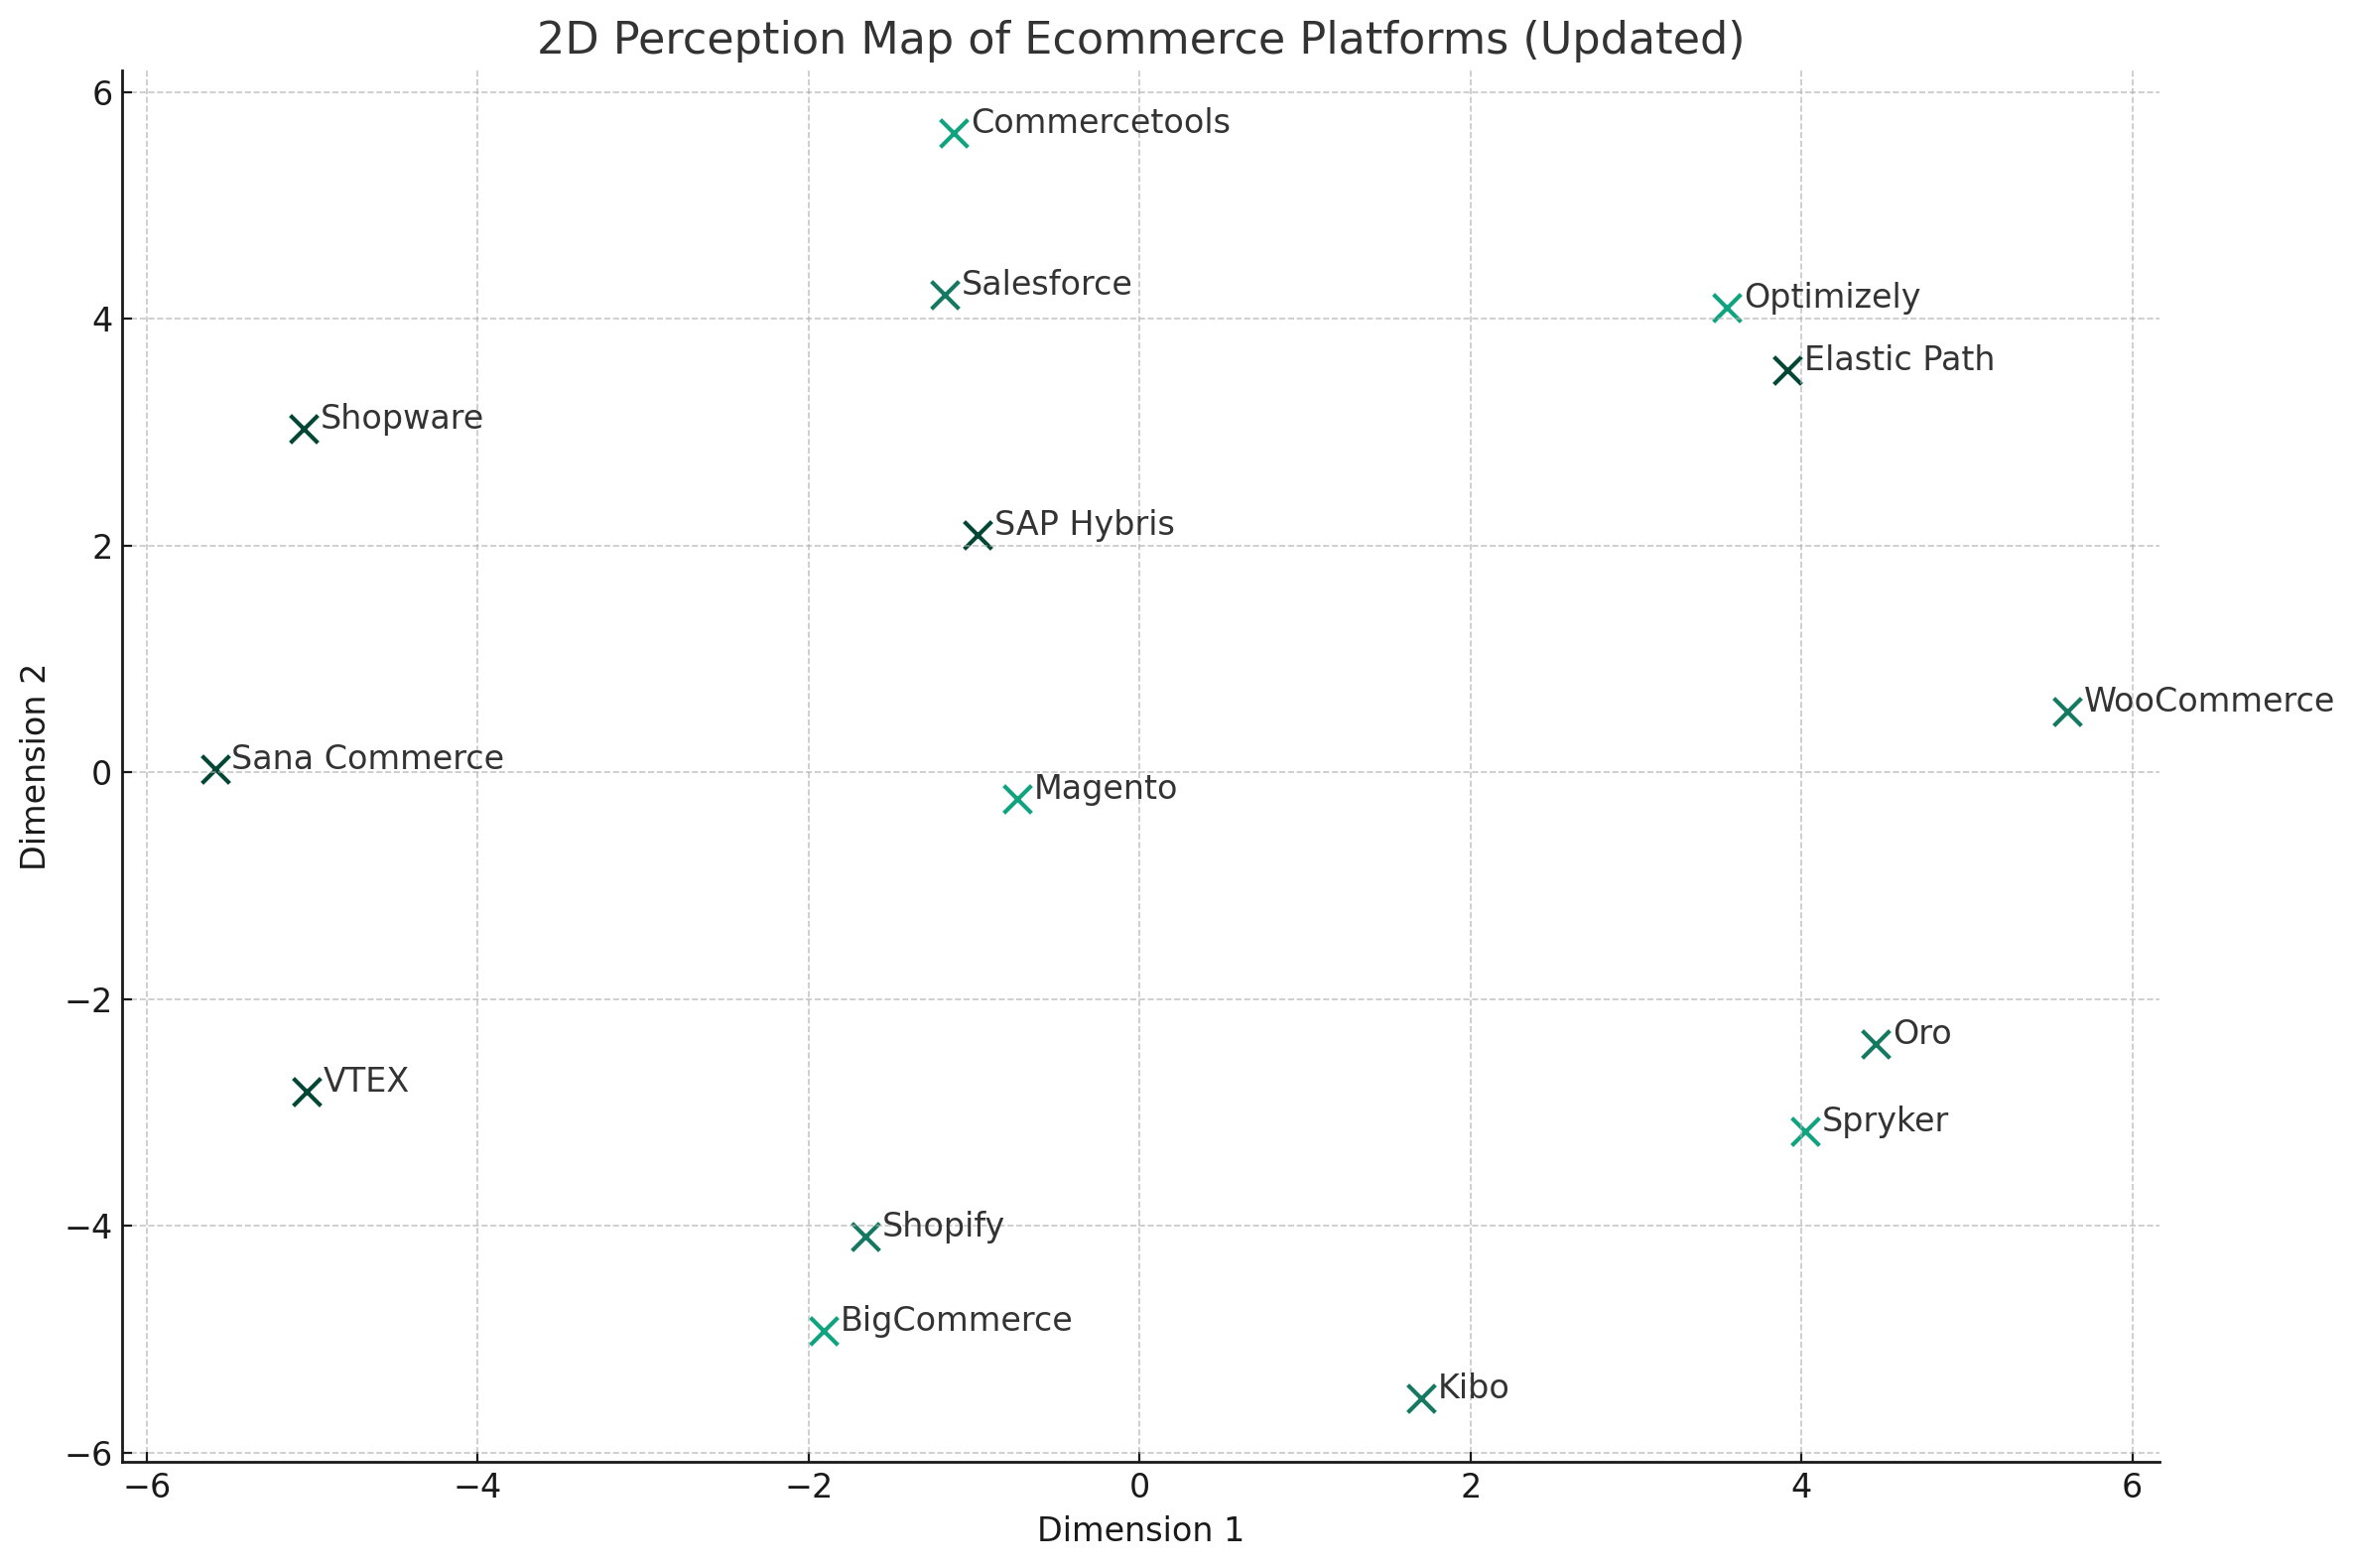 ecommeece platforms as brand perception map, built with ChatGPT